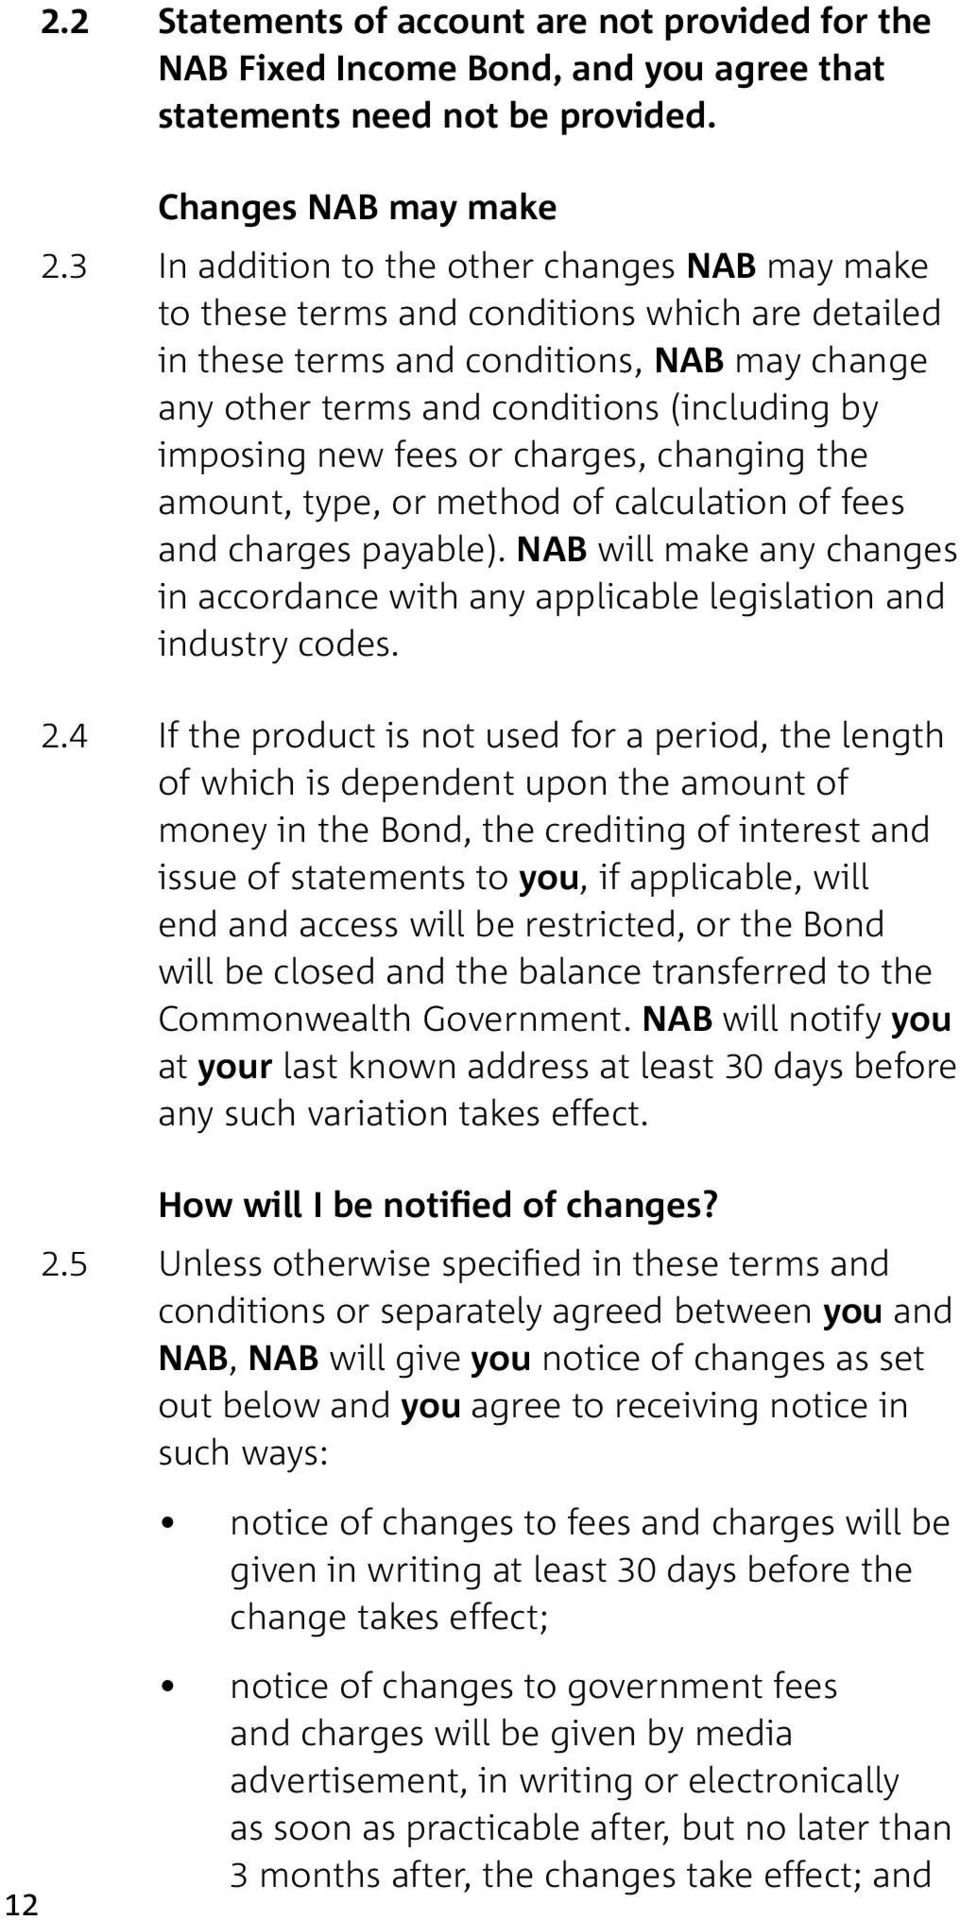 new fees or charges, changing the amount, type, or method of calculation of fees and charges payable). NAB will make any changes in accordance with any applicable legislation and industry codes. 2.